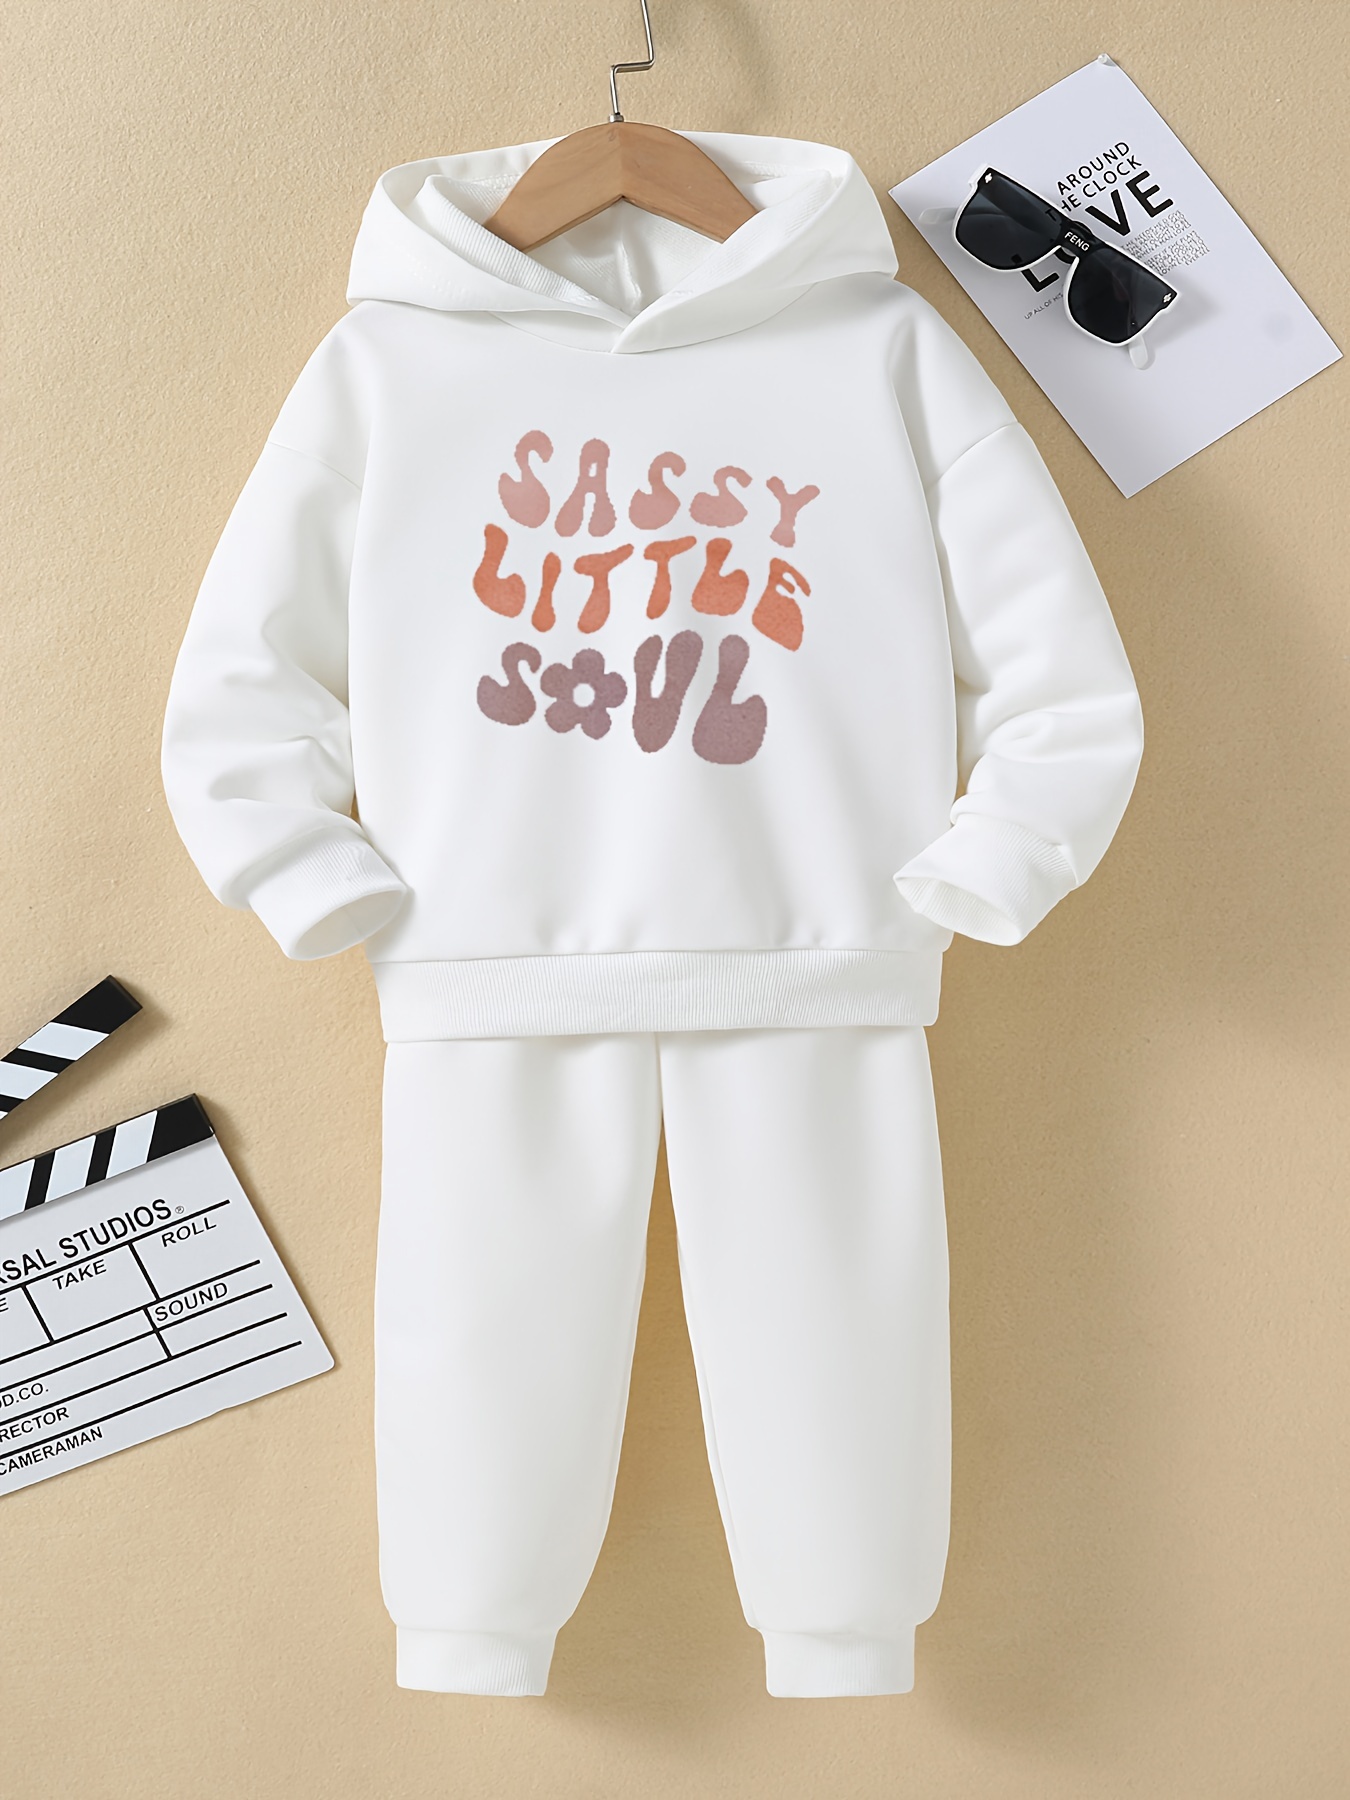 Outfit Set Toddler Girl, Girl Pullover Joggers Set